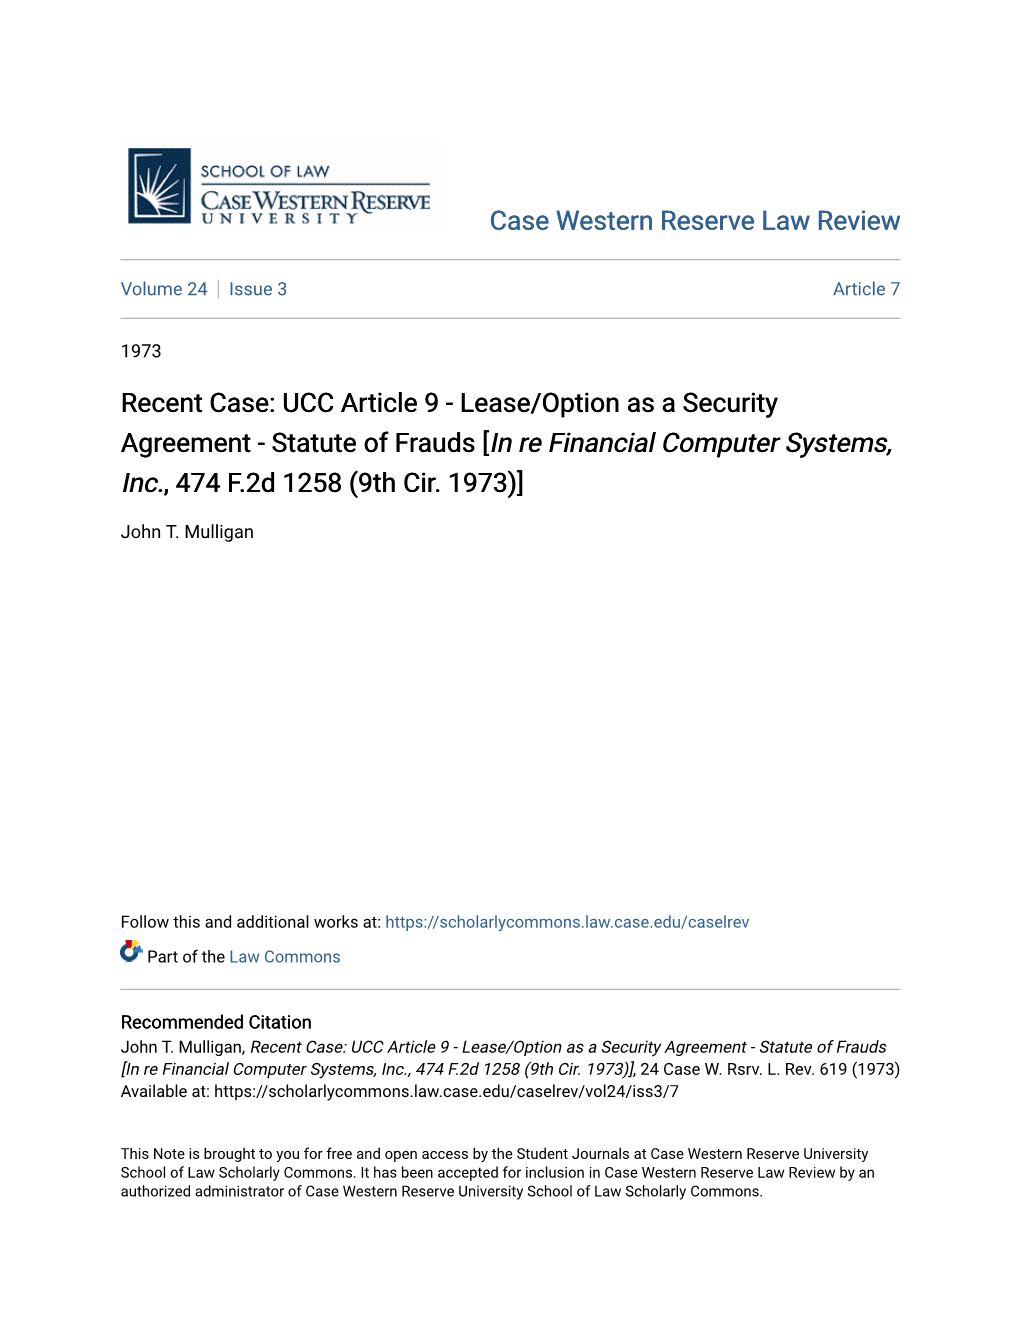 Recent Case: UCC Article 9 - Lease/Option As a Security Agreement - Statute of Frauds [In Re Financial Computer Systems, Inc., 474 F.2D 1258 (9Th Cir